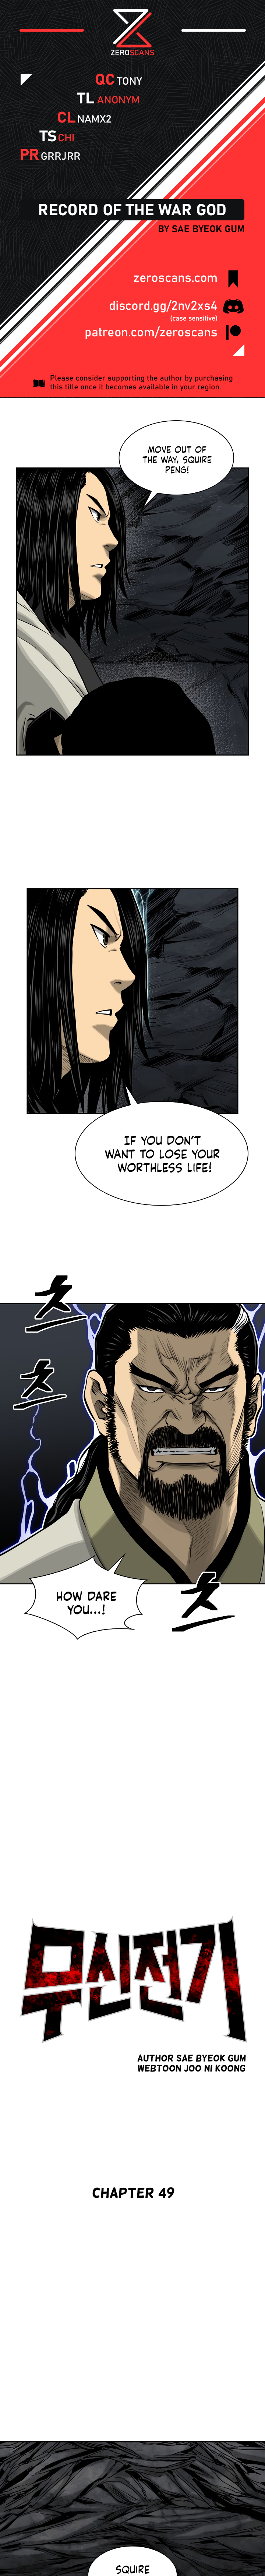 Record of the War God - Chapter 5925 - Image 1